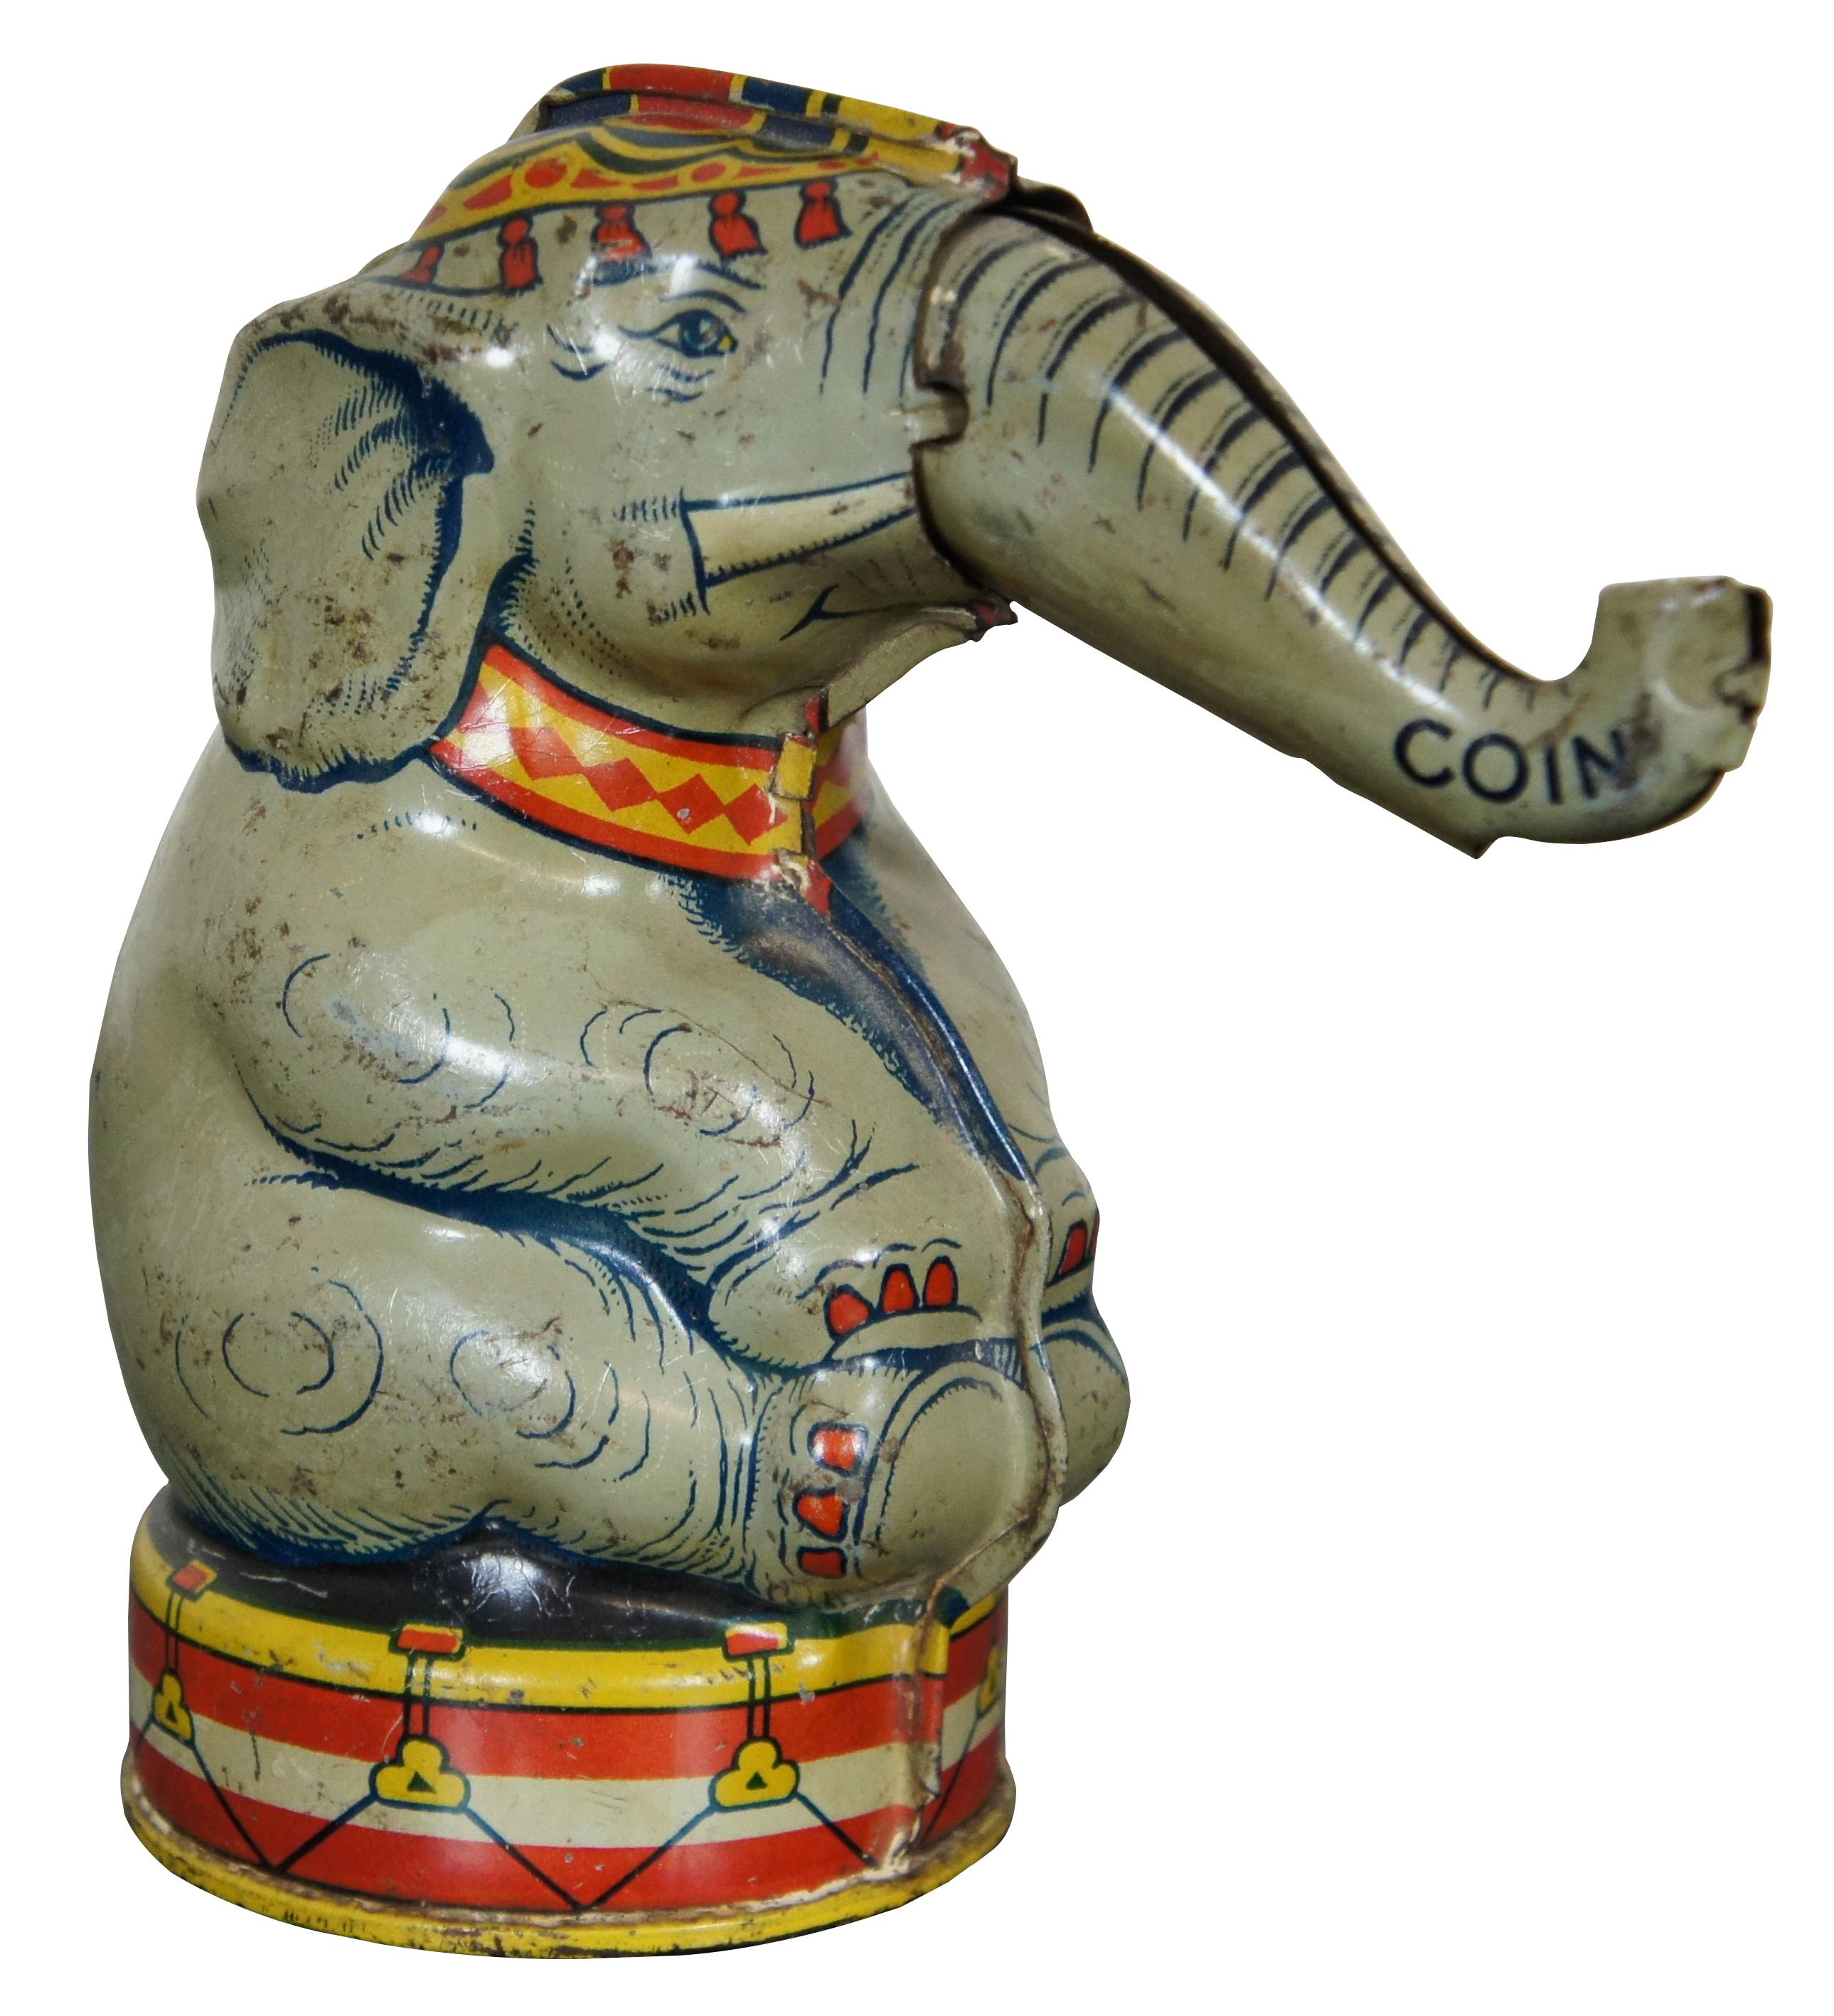 Vintage mid century tin litho mechanical coin bank in the shape of a circus elephant, mad by J. Chein & Company.